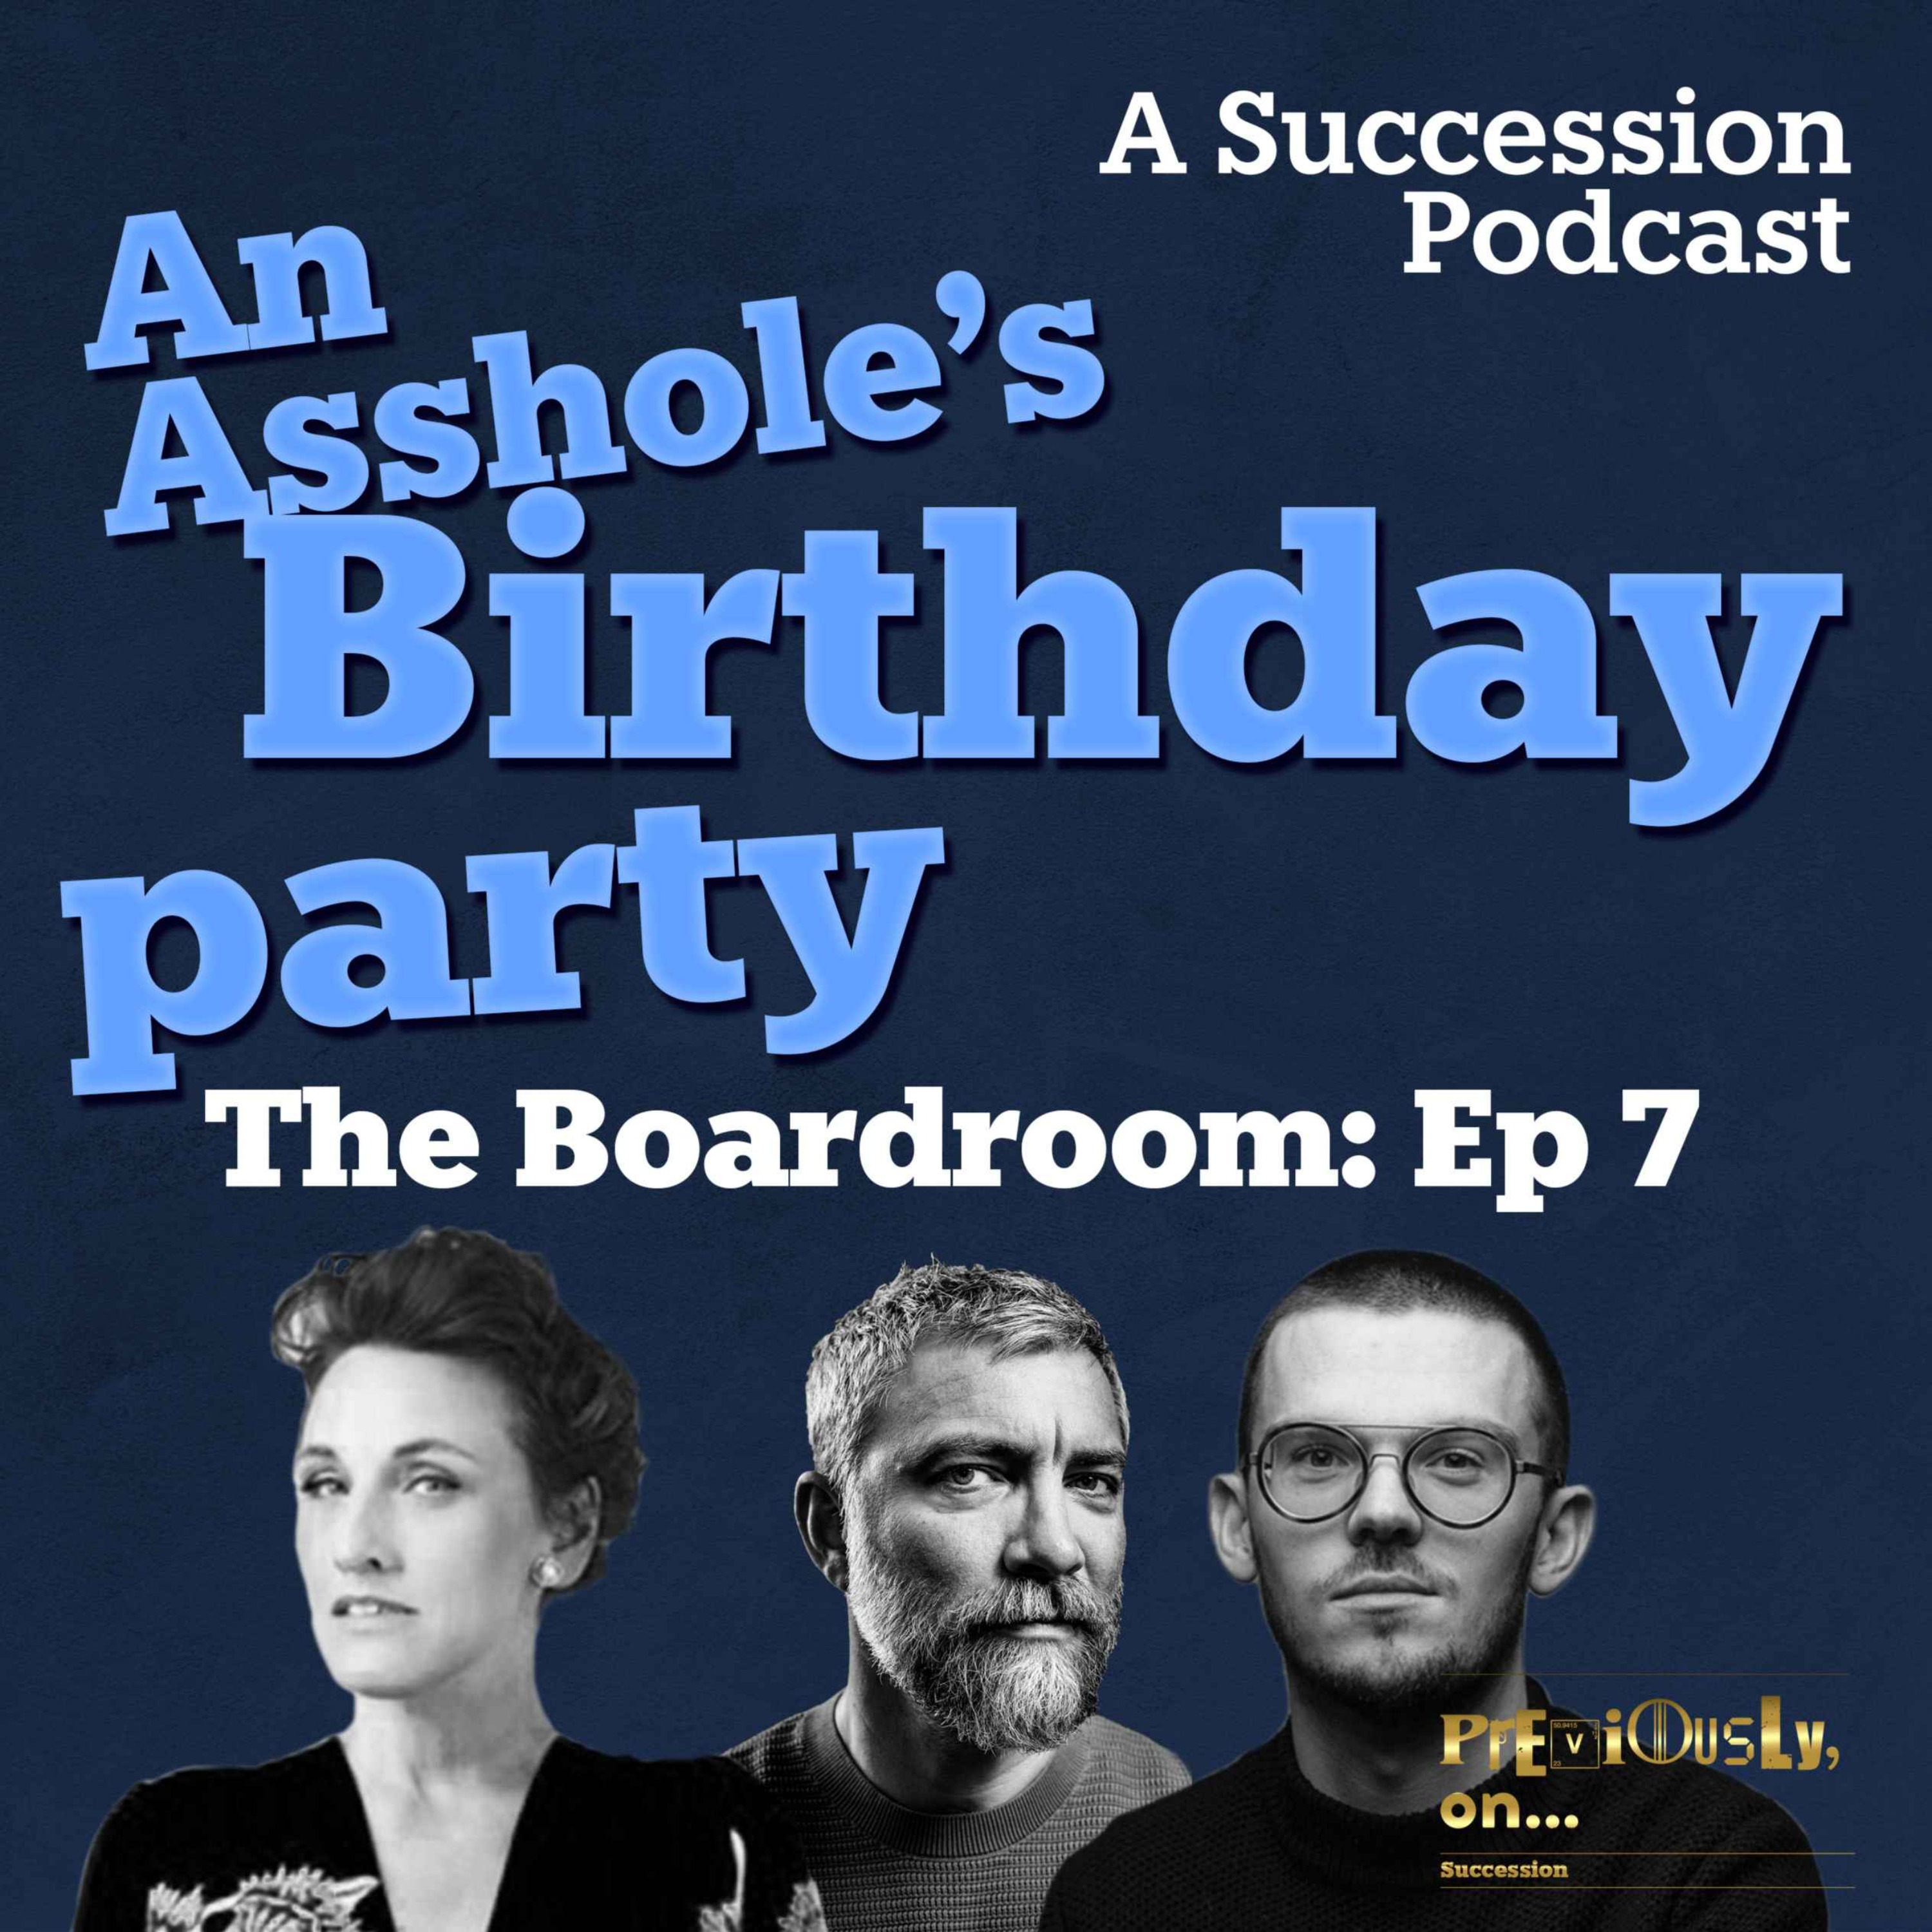 The Boardroom Ep 7: An Asshole’s Birthday Party